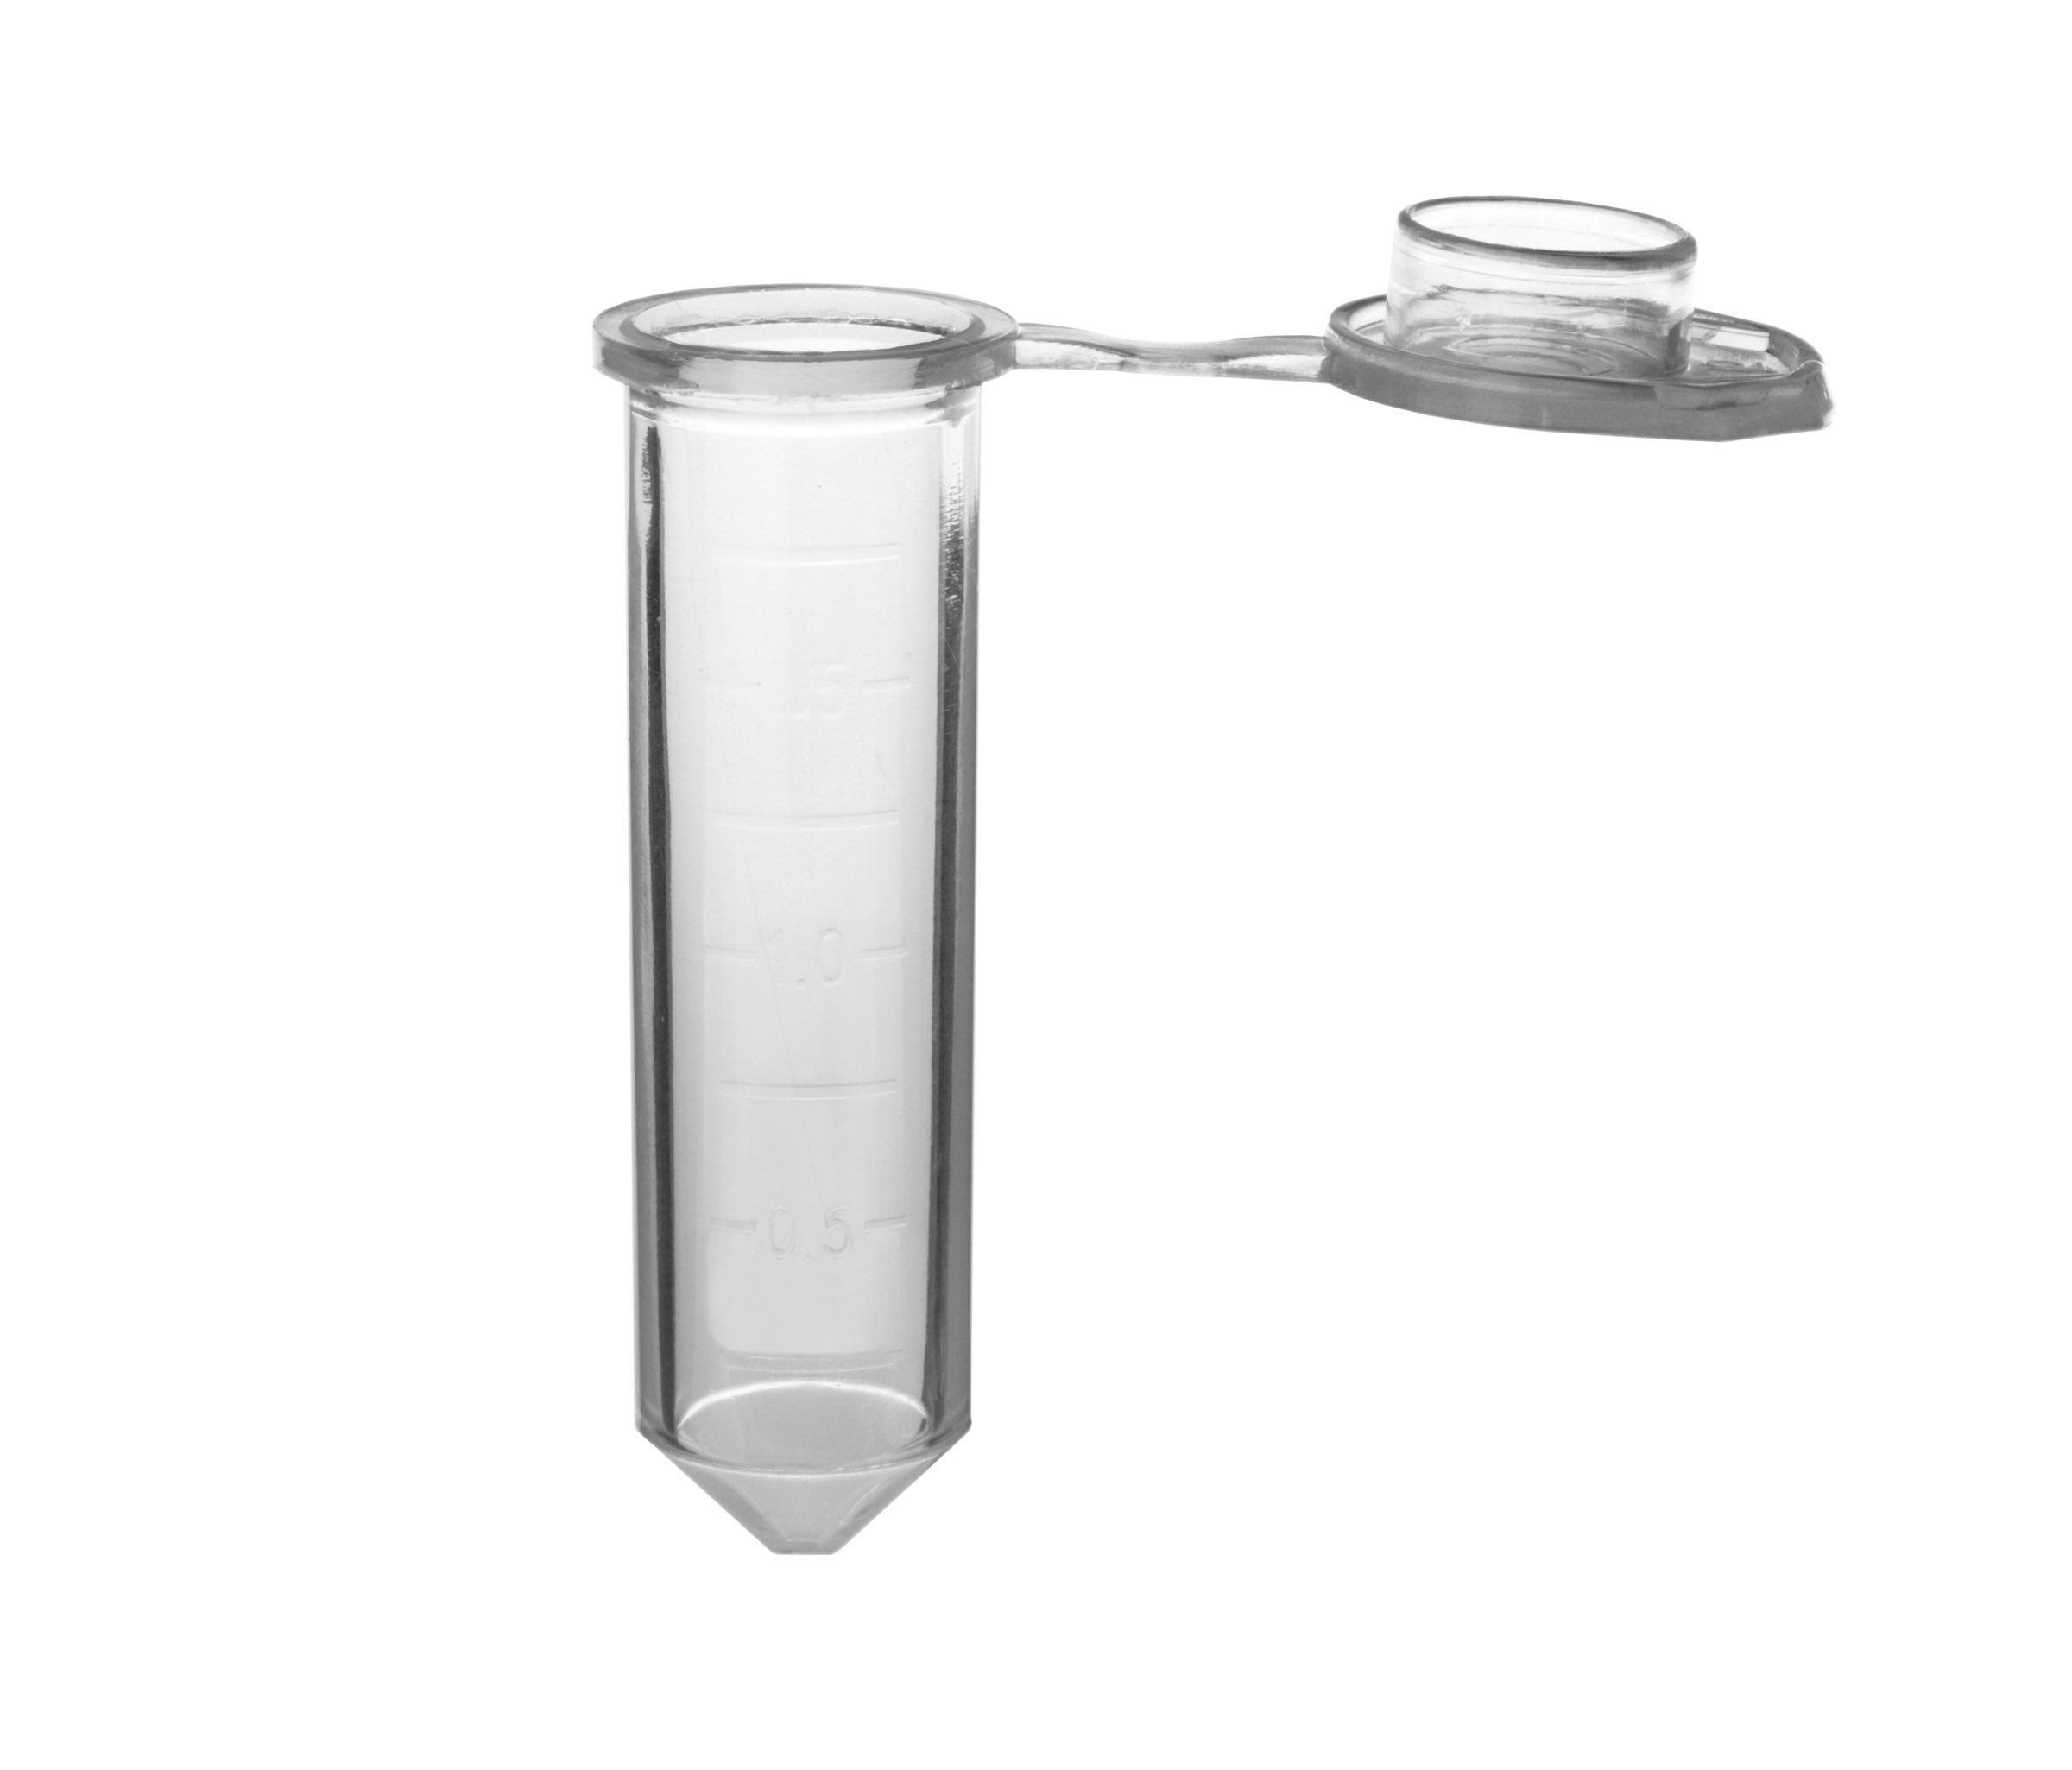 MTC Bio C2002, SureSeal Microcentrifuge Tube with Cap, 2.0ml, Clear, Sterile, with Self-Standing Bag & Stop-Pops, 500/pk